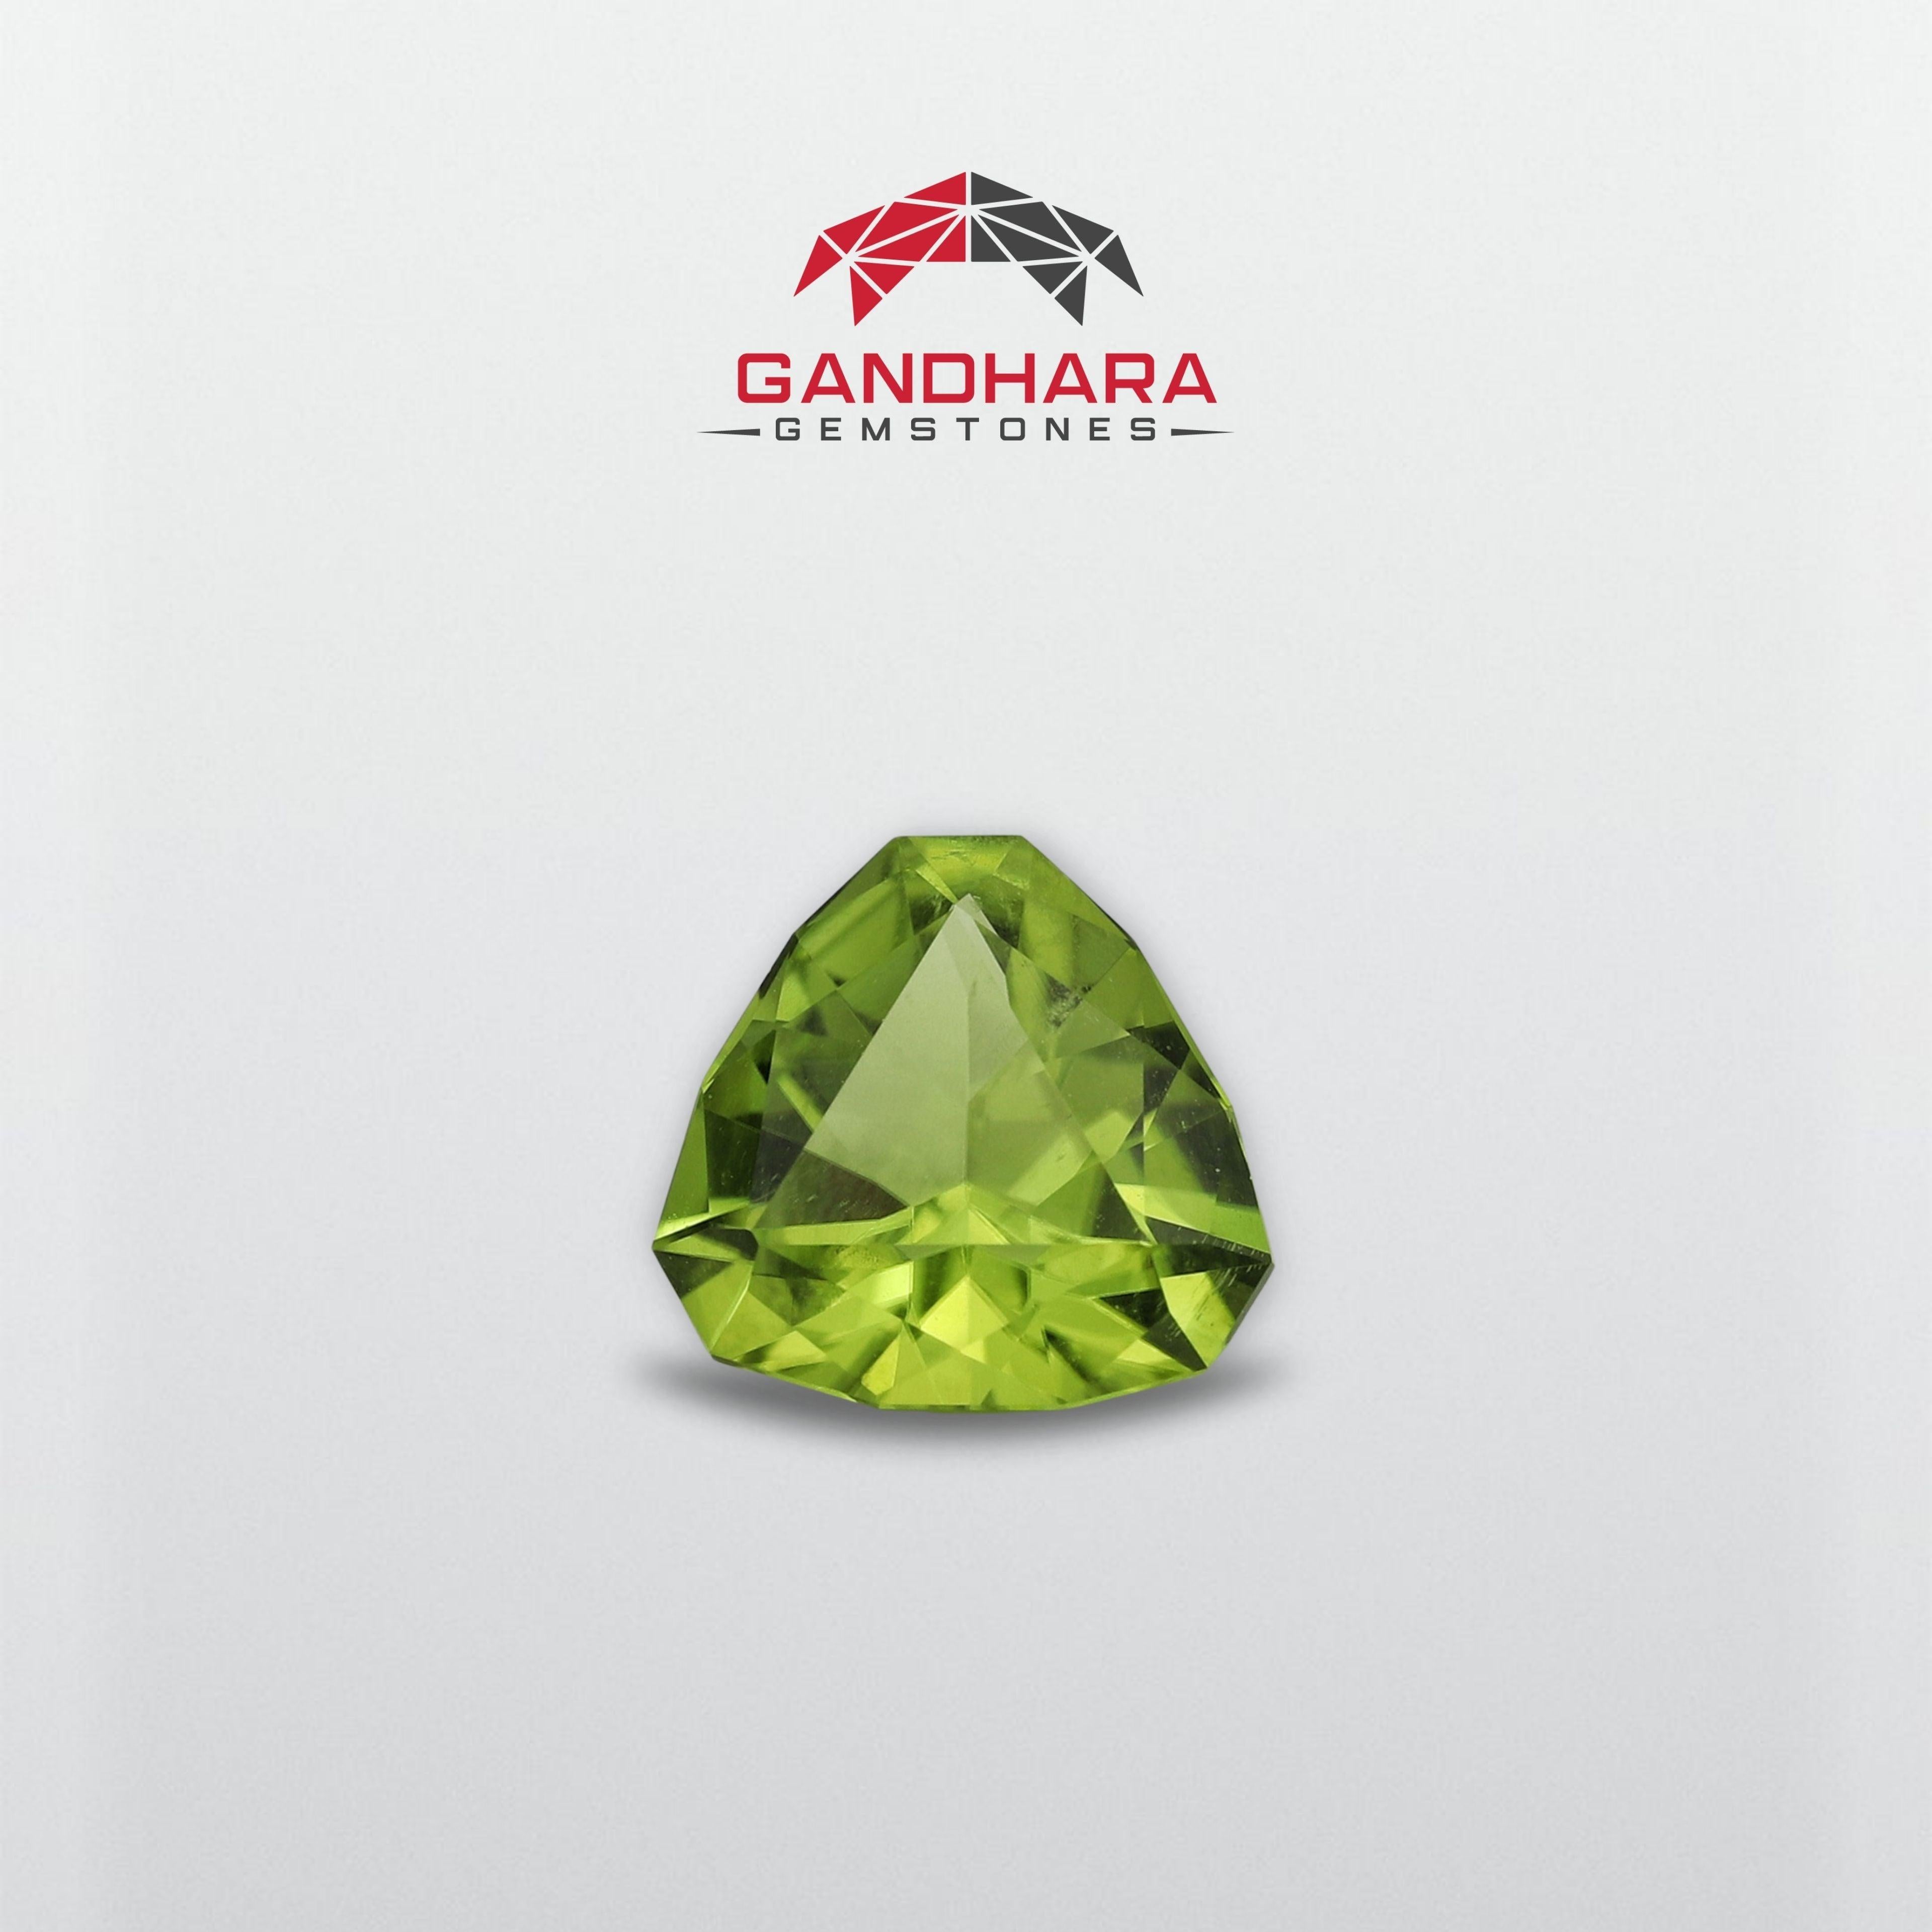 Splendor Peridot Gemstone For Ring, available for sale at whole sale price natural high quality, Flawless Trilliant cut 2.28 carats peridot gemstone from Pakistan.

Product Information:
GEMSTONE TYPE	Splendor Peridot Gemstone For Ring
WEIGHT	2.28